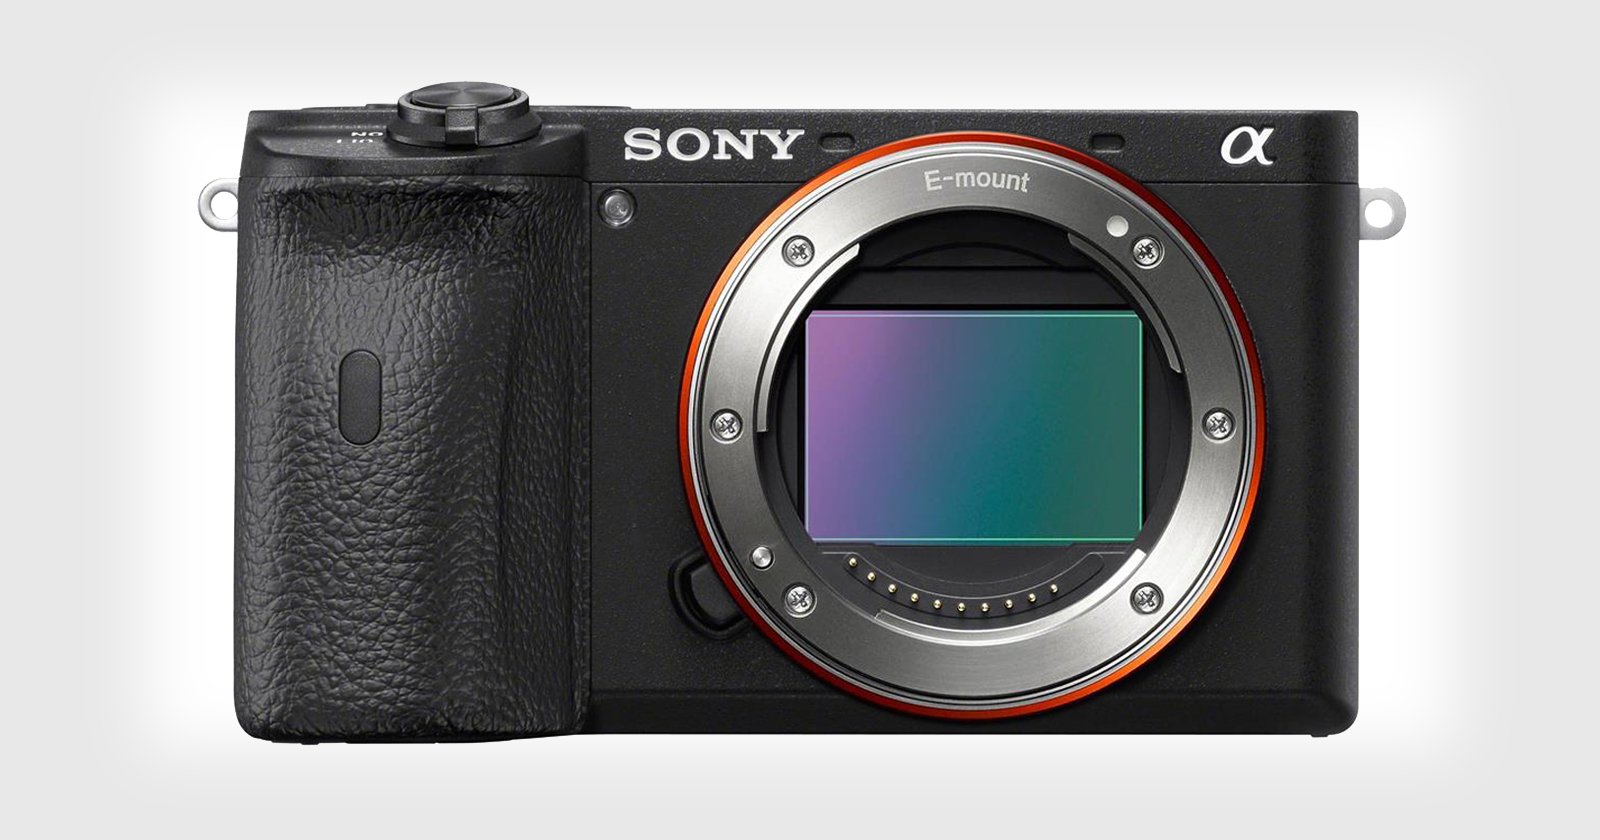 Sony to Debut a New Line of Compact Full-Frame Cameras Starting this Month: Report